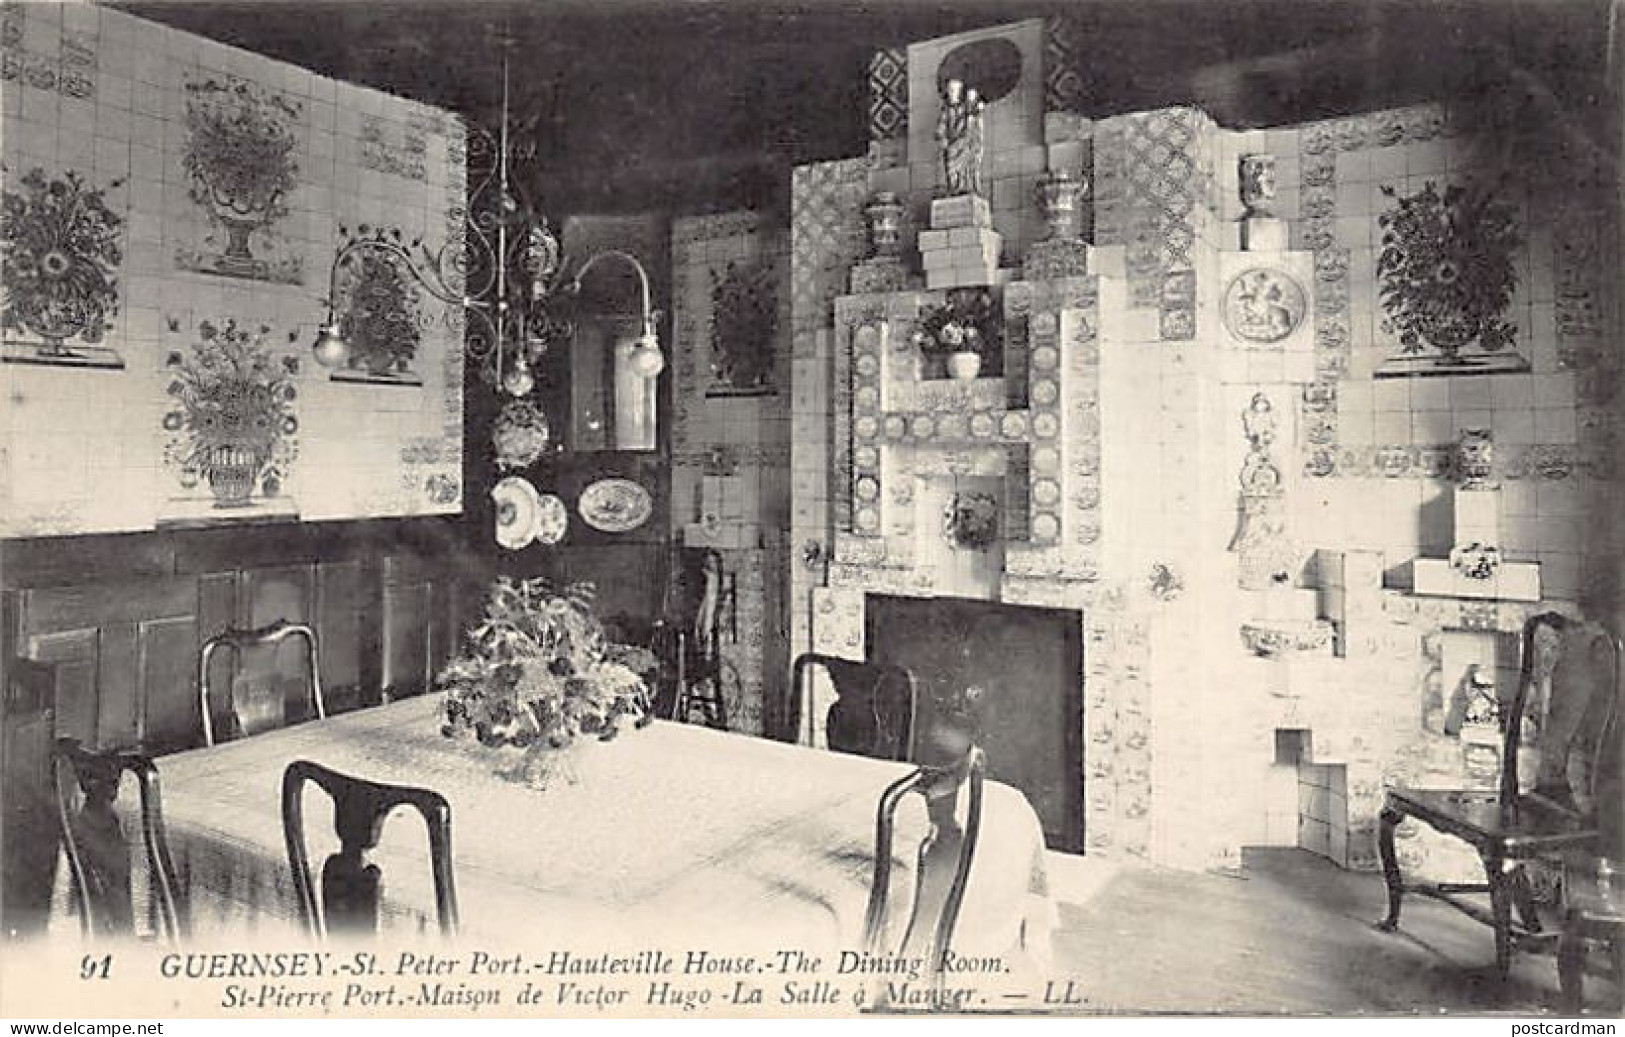 Guernsey - ST. PETER PORT - Hauteville House - The Dining Room - Publ. Levy L.L. 91 - Guernsey